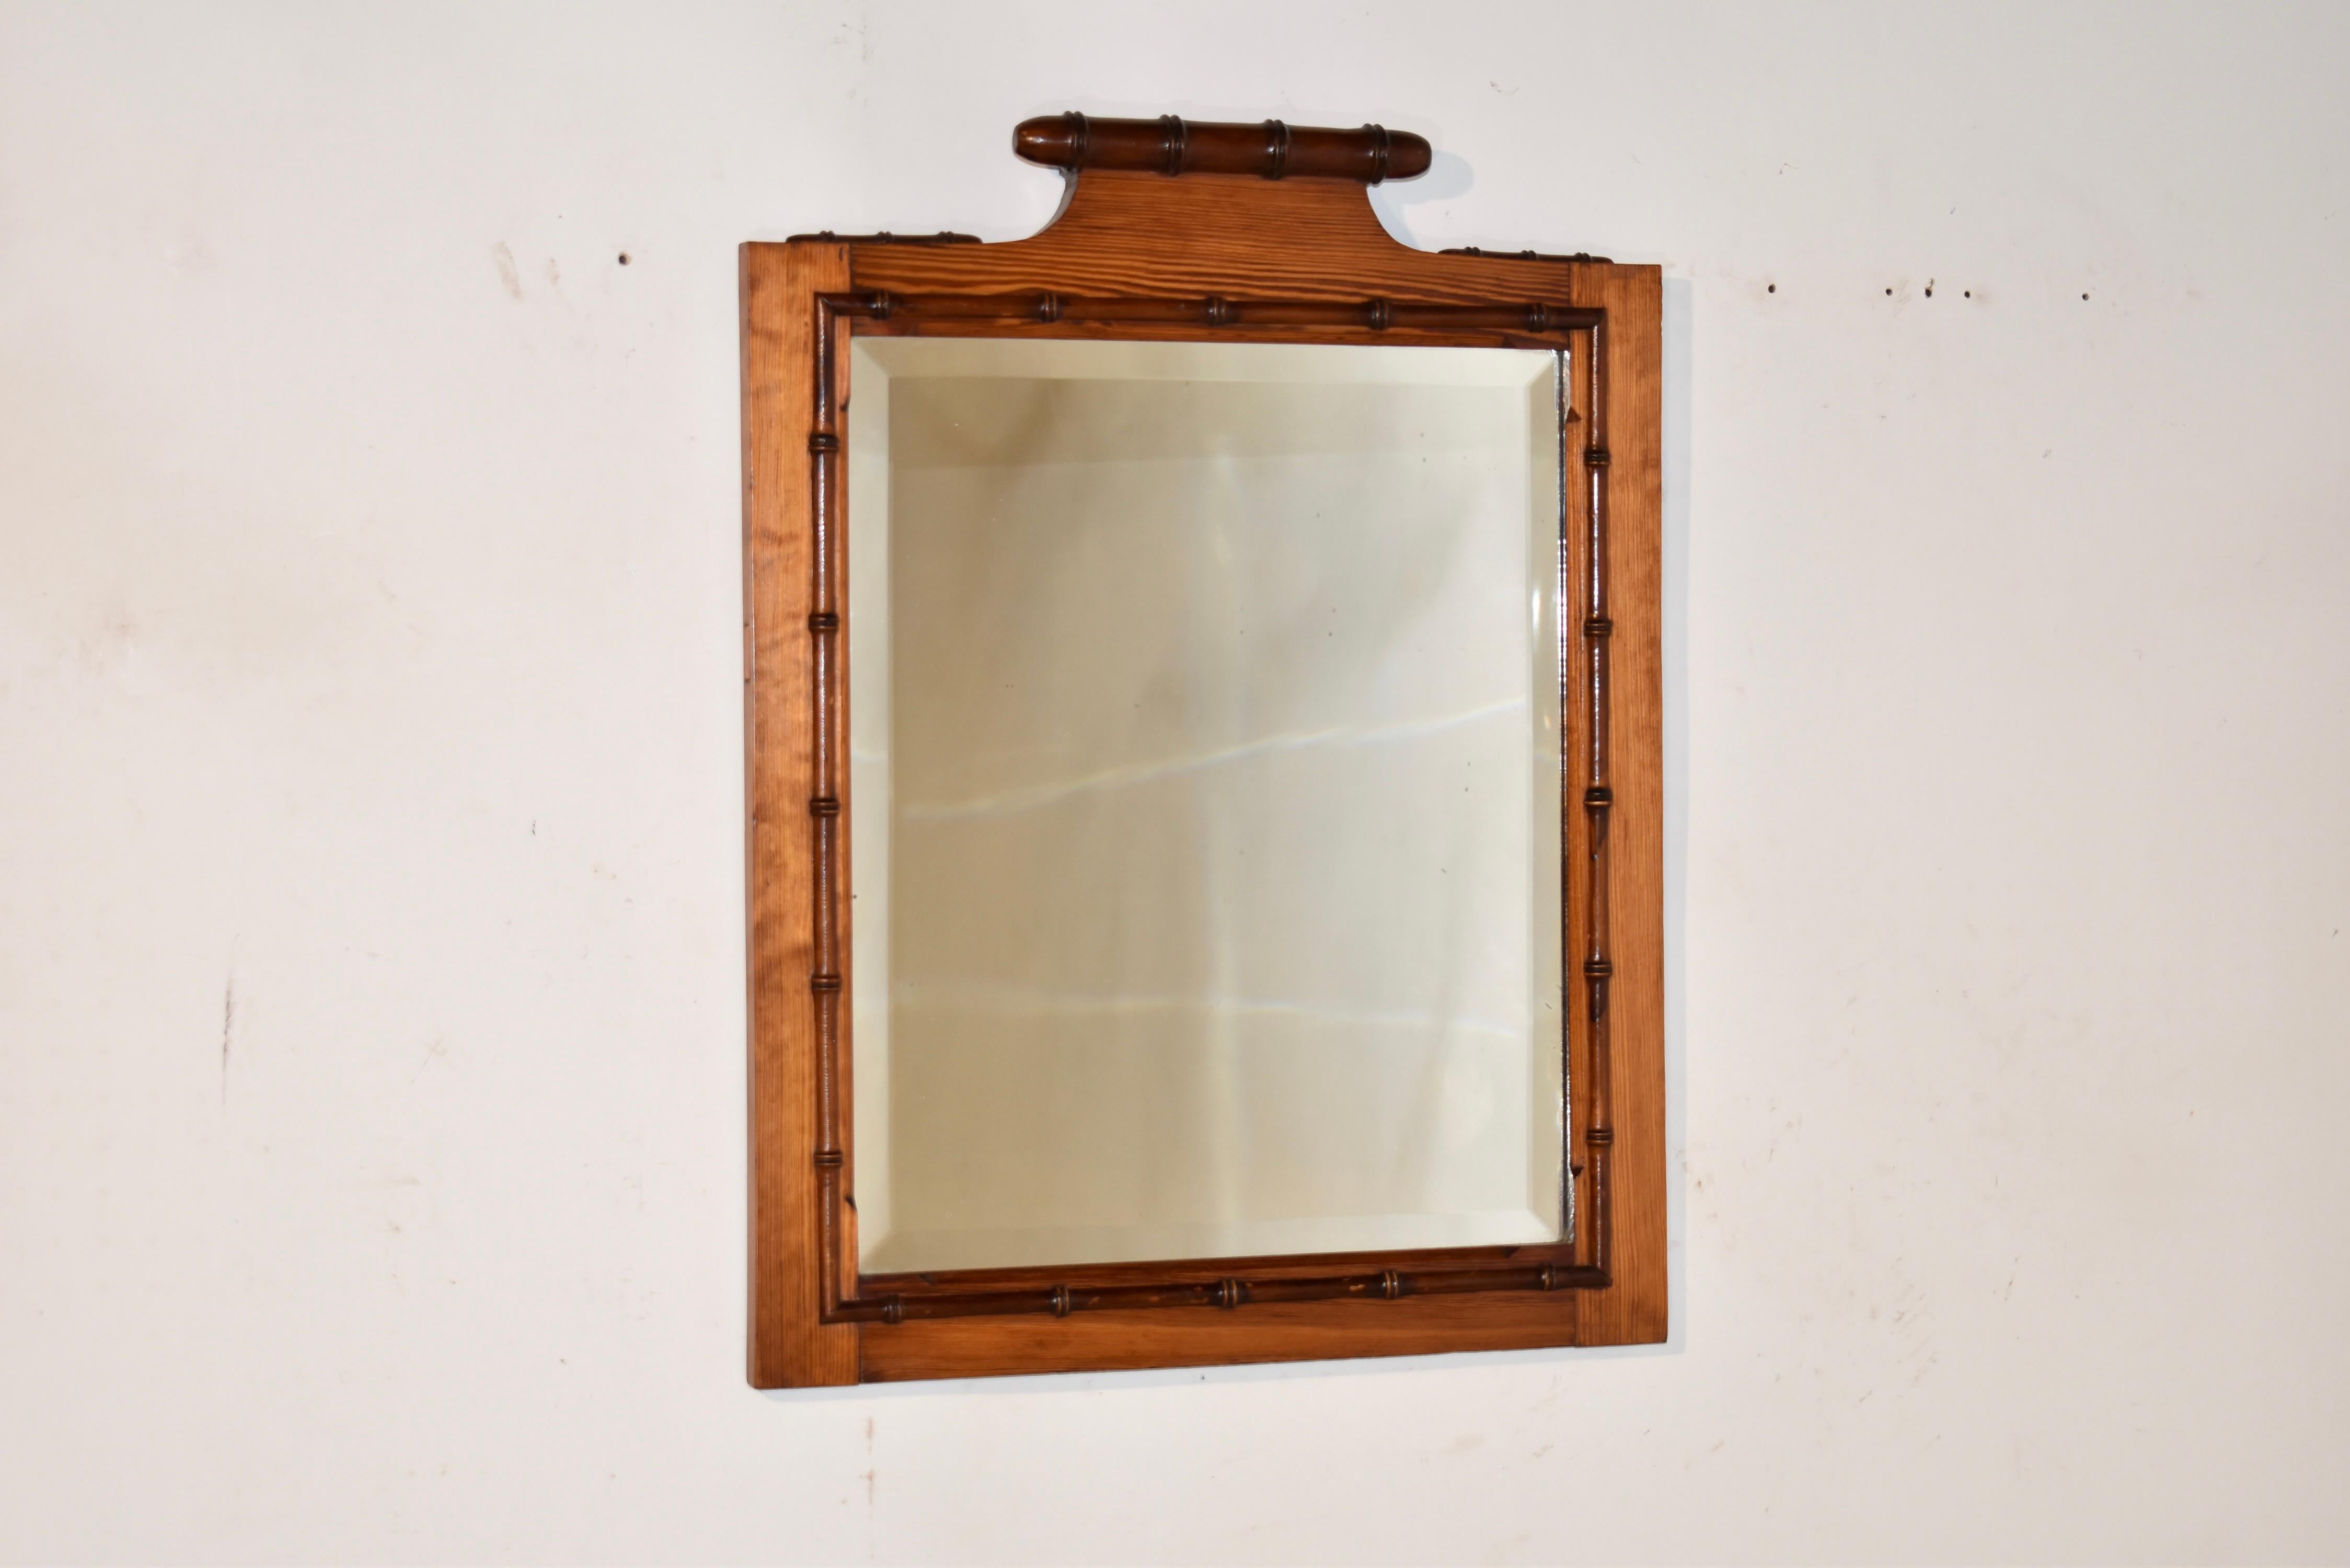 Late 19th century French wall mirror made from pitch pine and cherry.  The frame is made from pitch pine, which has a richer and developed grain pattern than regular pine.  All of the turnings are made from cherry and have been applied to this